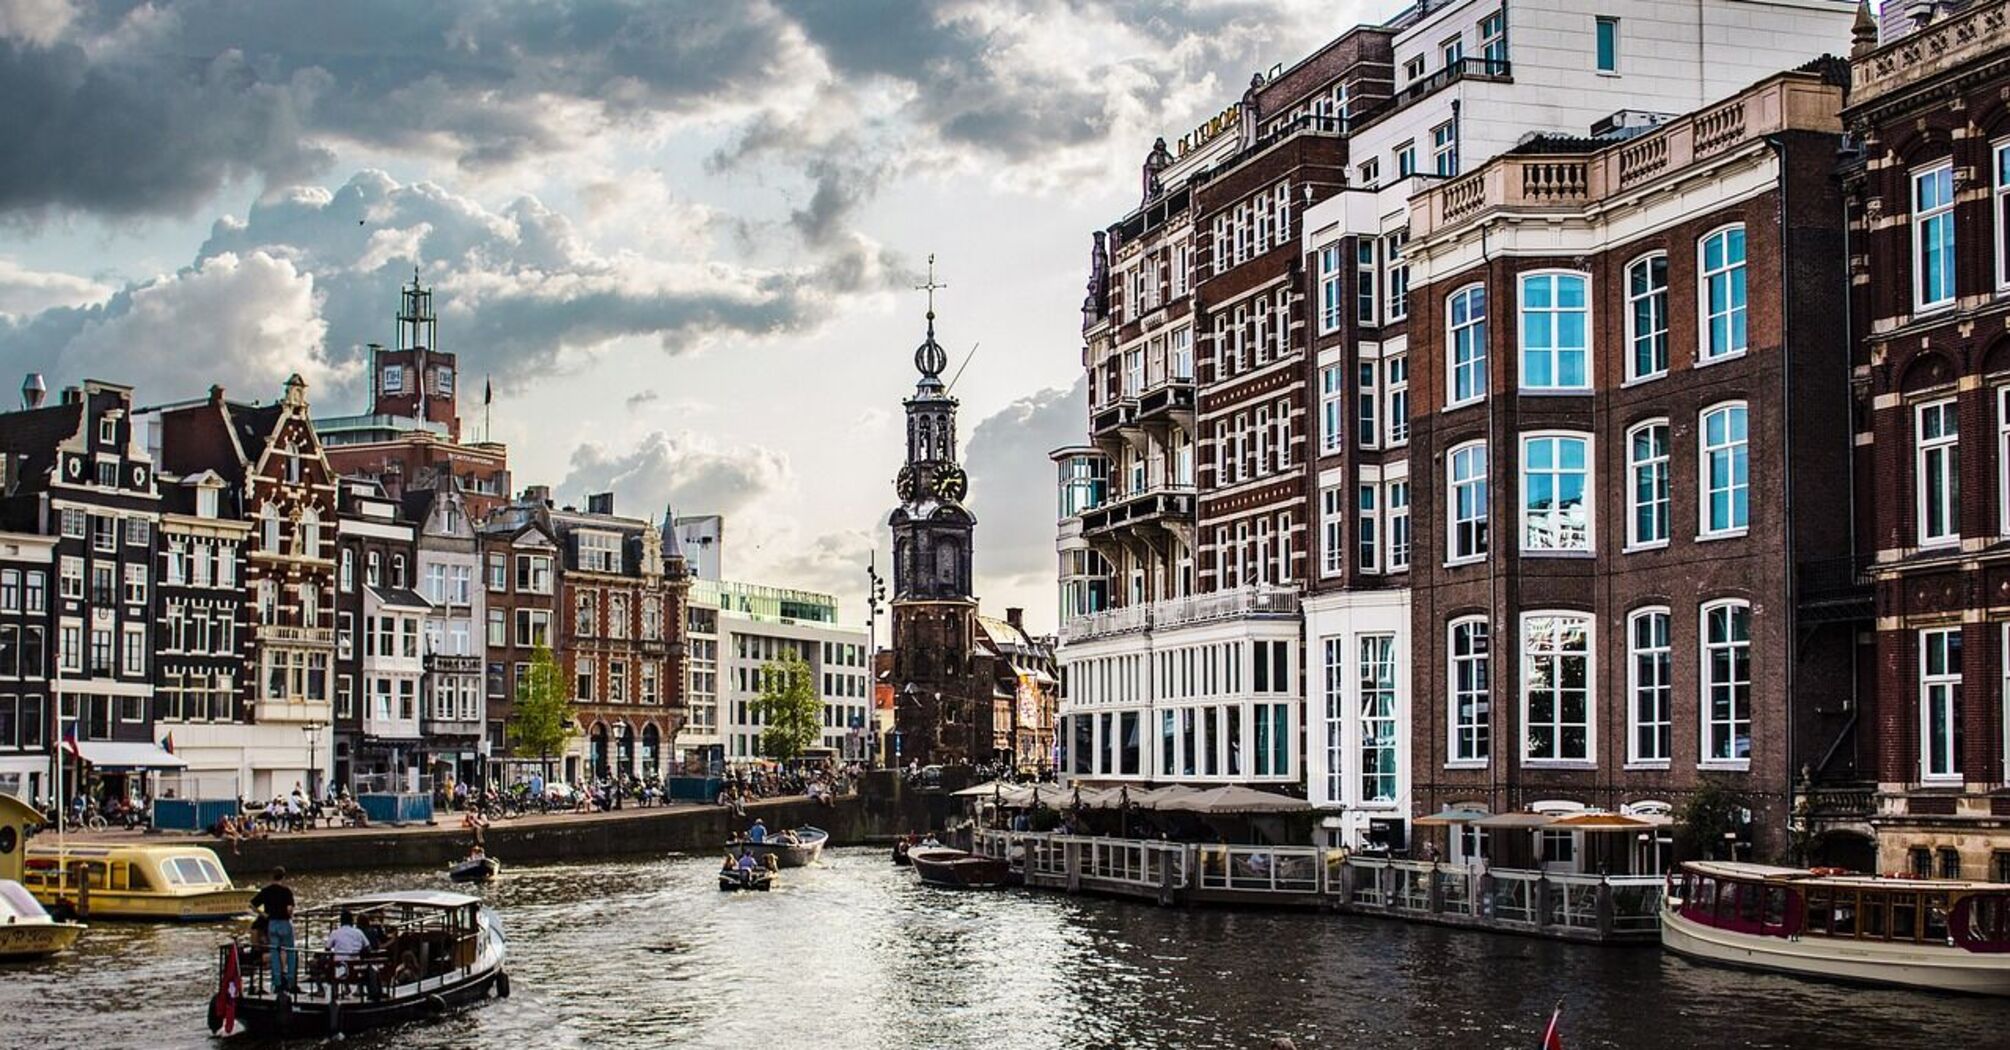 Eurostar launches fast £35 route from London to Amsterdam